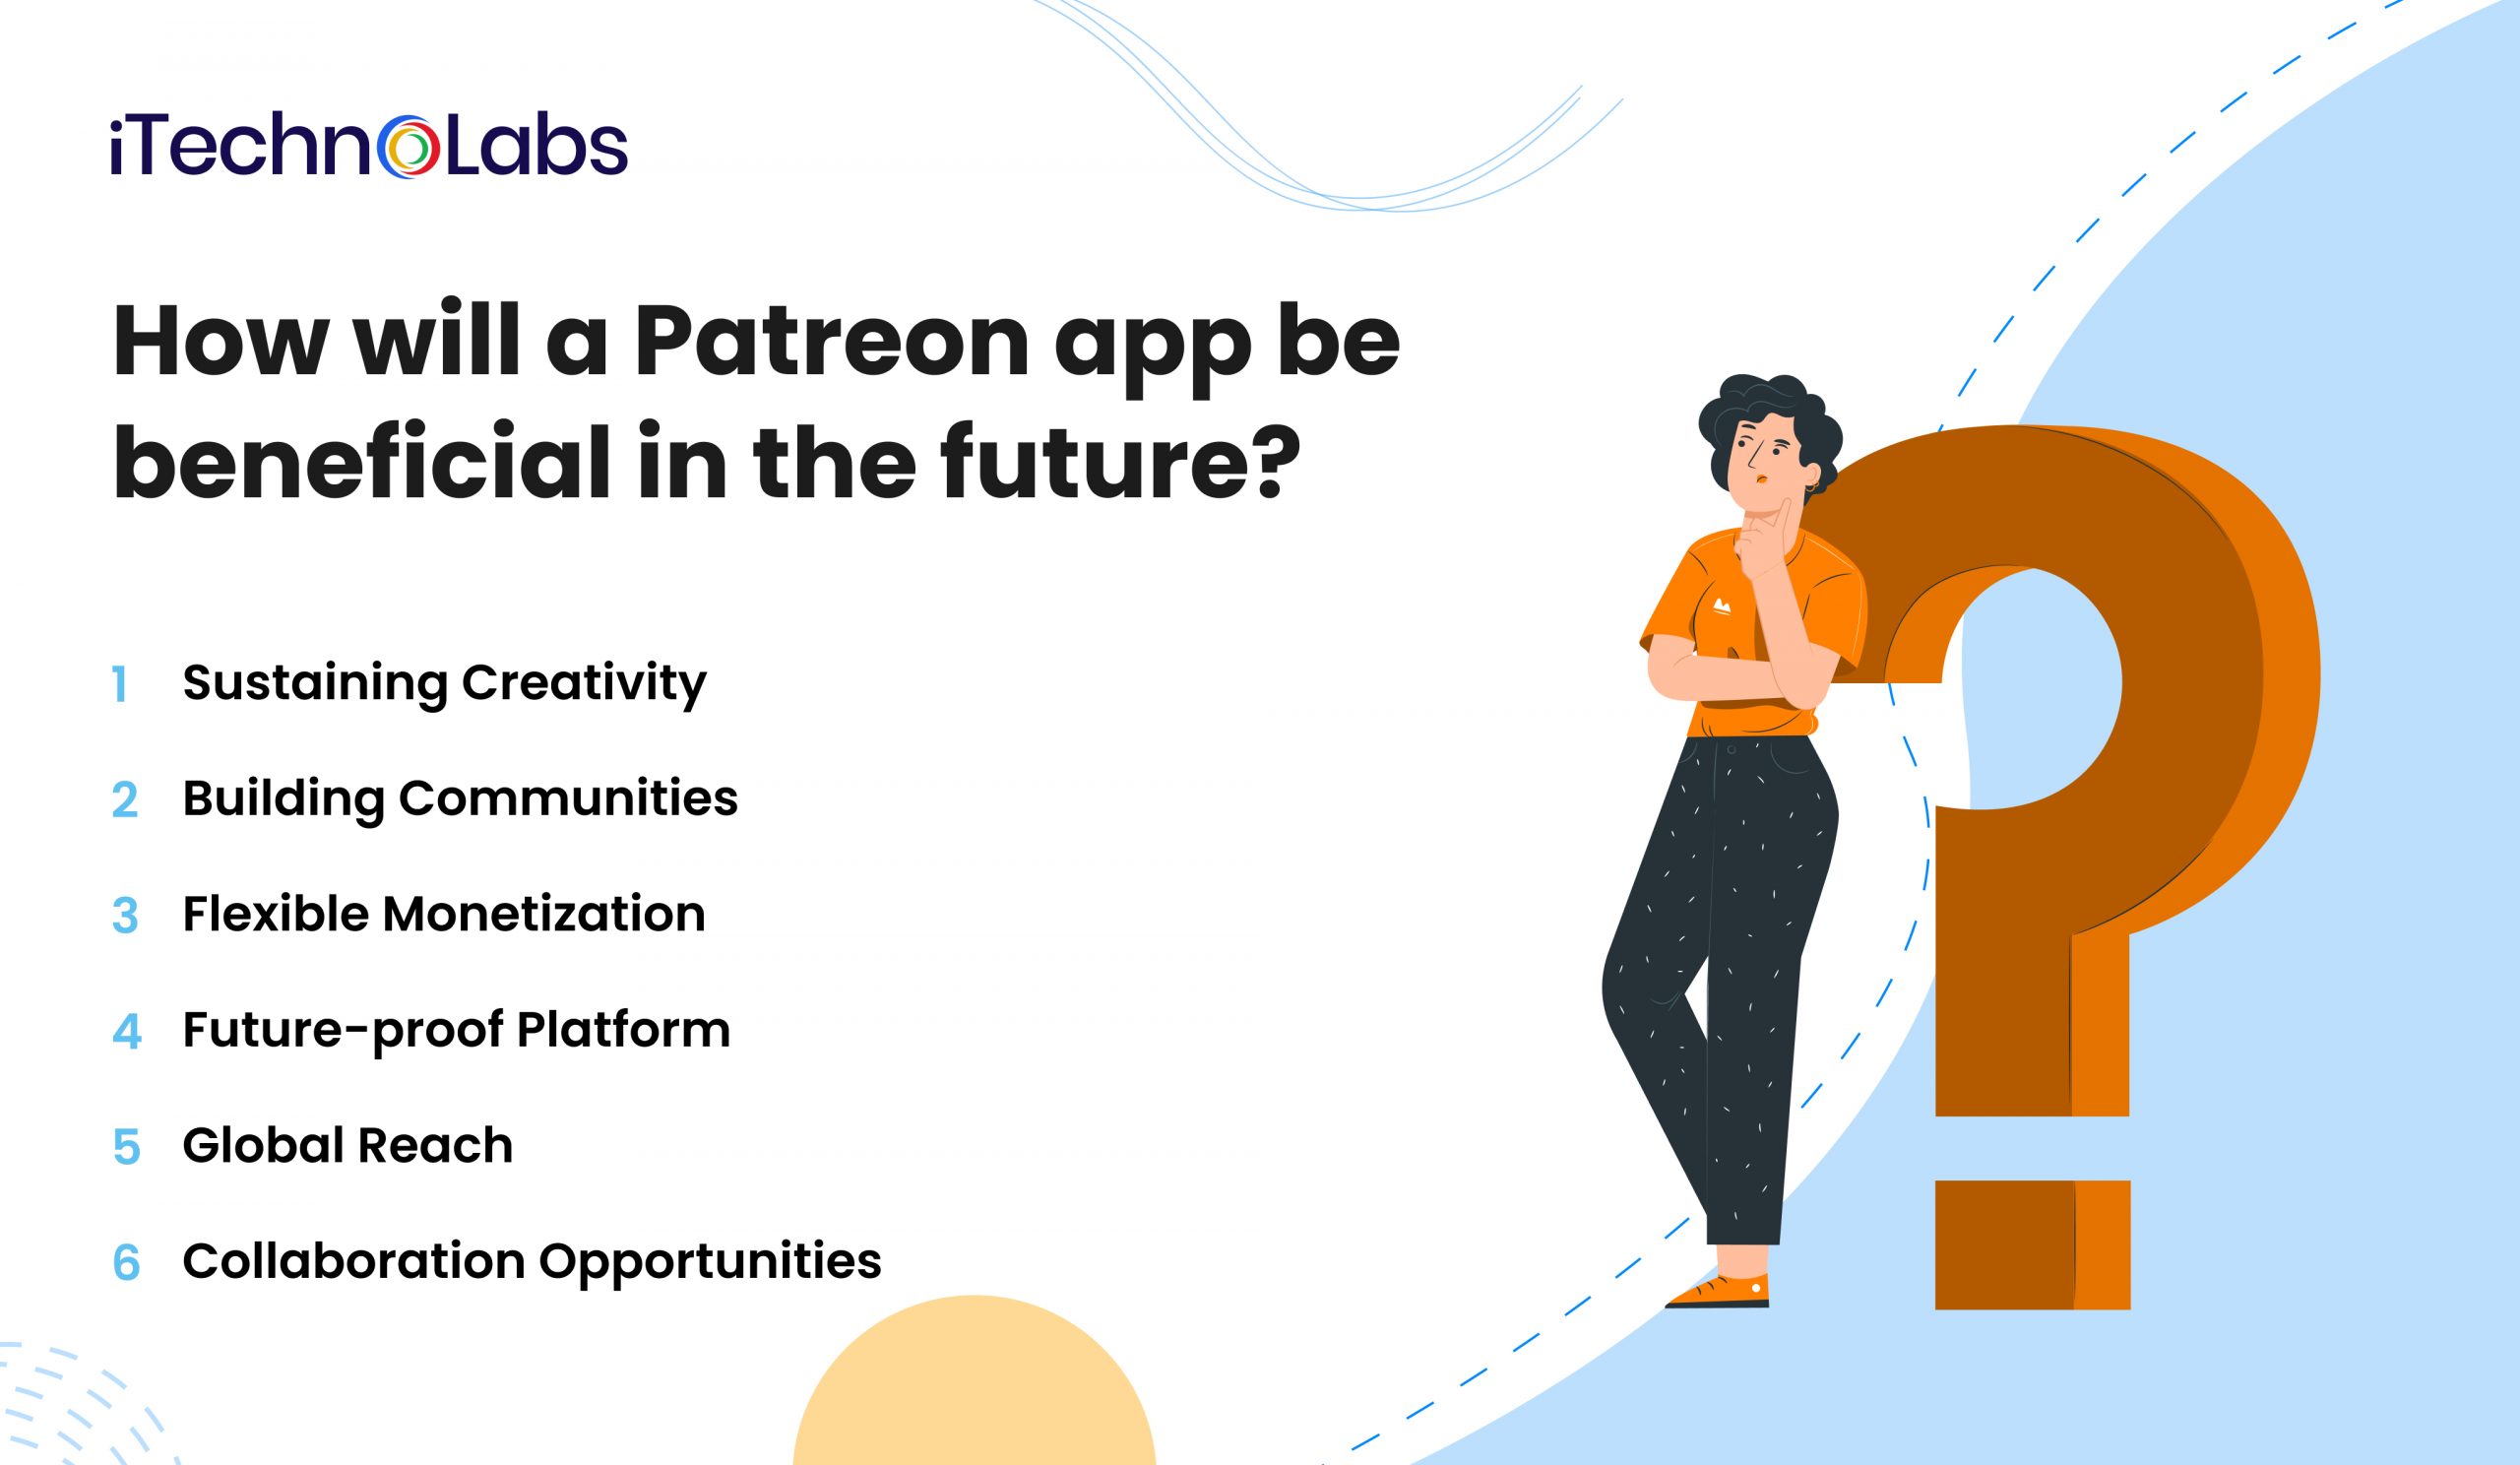 iTechnolabs-How will a Patreon app be beneficial in the future?